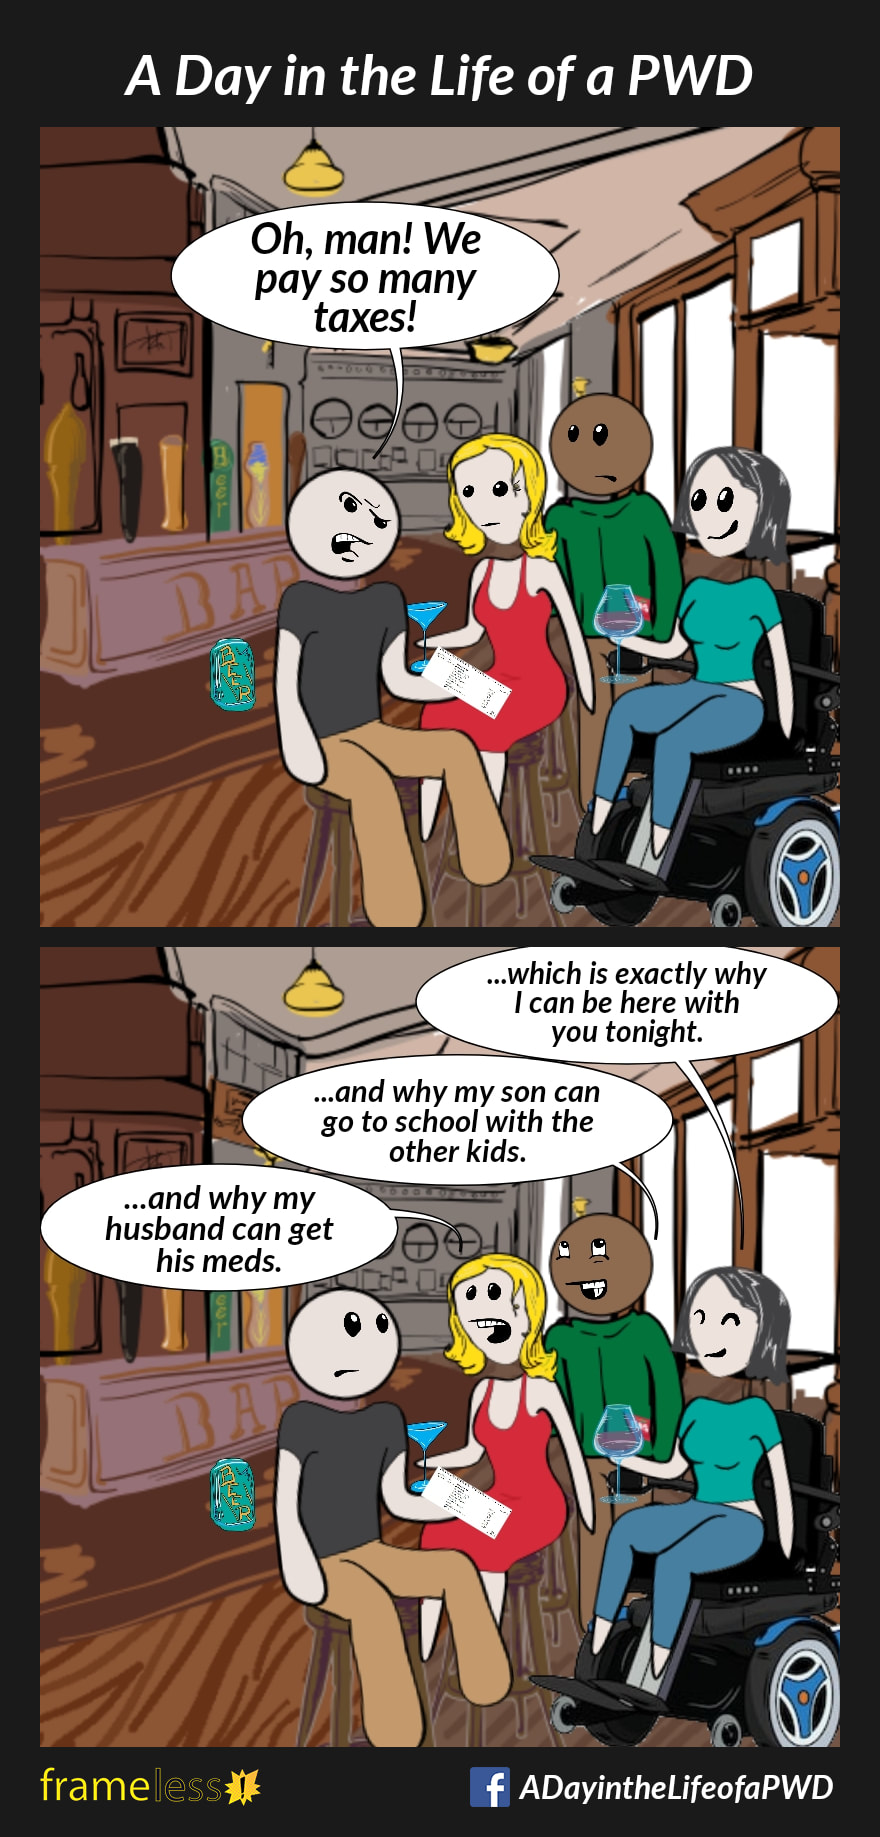 COMIC STRIP 
A Day in the Life of a PWD (Person With a Disability) 

Frame 1:
A woman in a power wheelchair is having a drink at a pub with 3 friends.
FRIEND A (angrily): Oh, man! We pay so many taxes!

Frame 2:
WOMAN: ...which is exactly why I can be here with you tonight.
FRIEND B: ...and why my son can go to school with the other kids.
FRIEND C: ...and why my husband can get his meds.